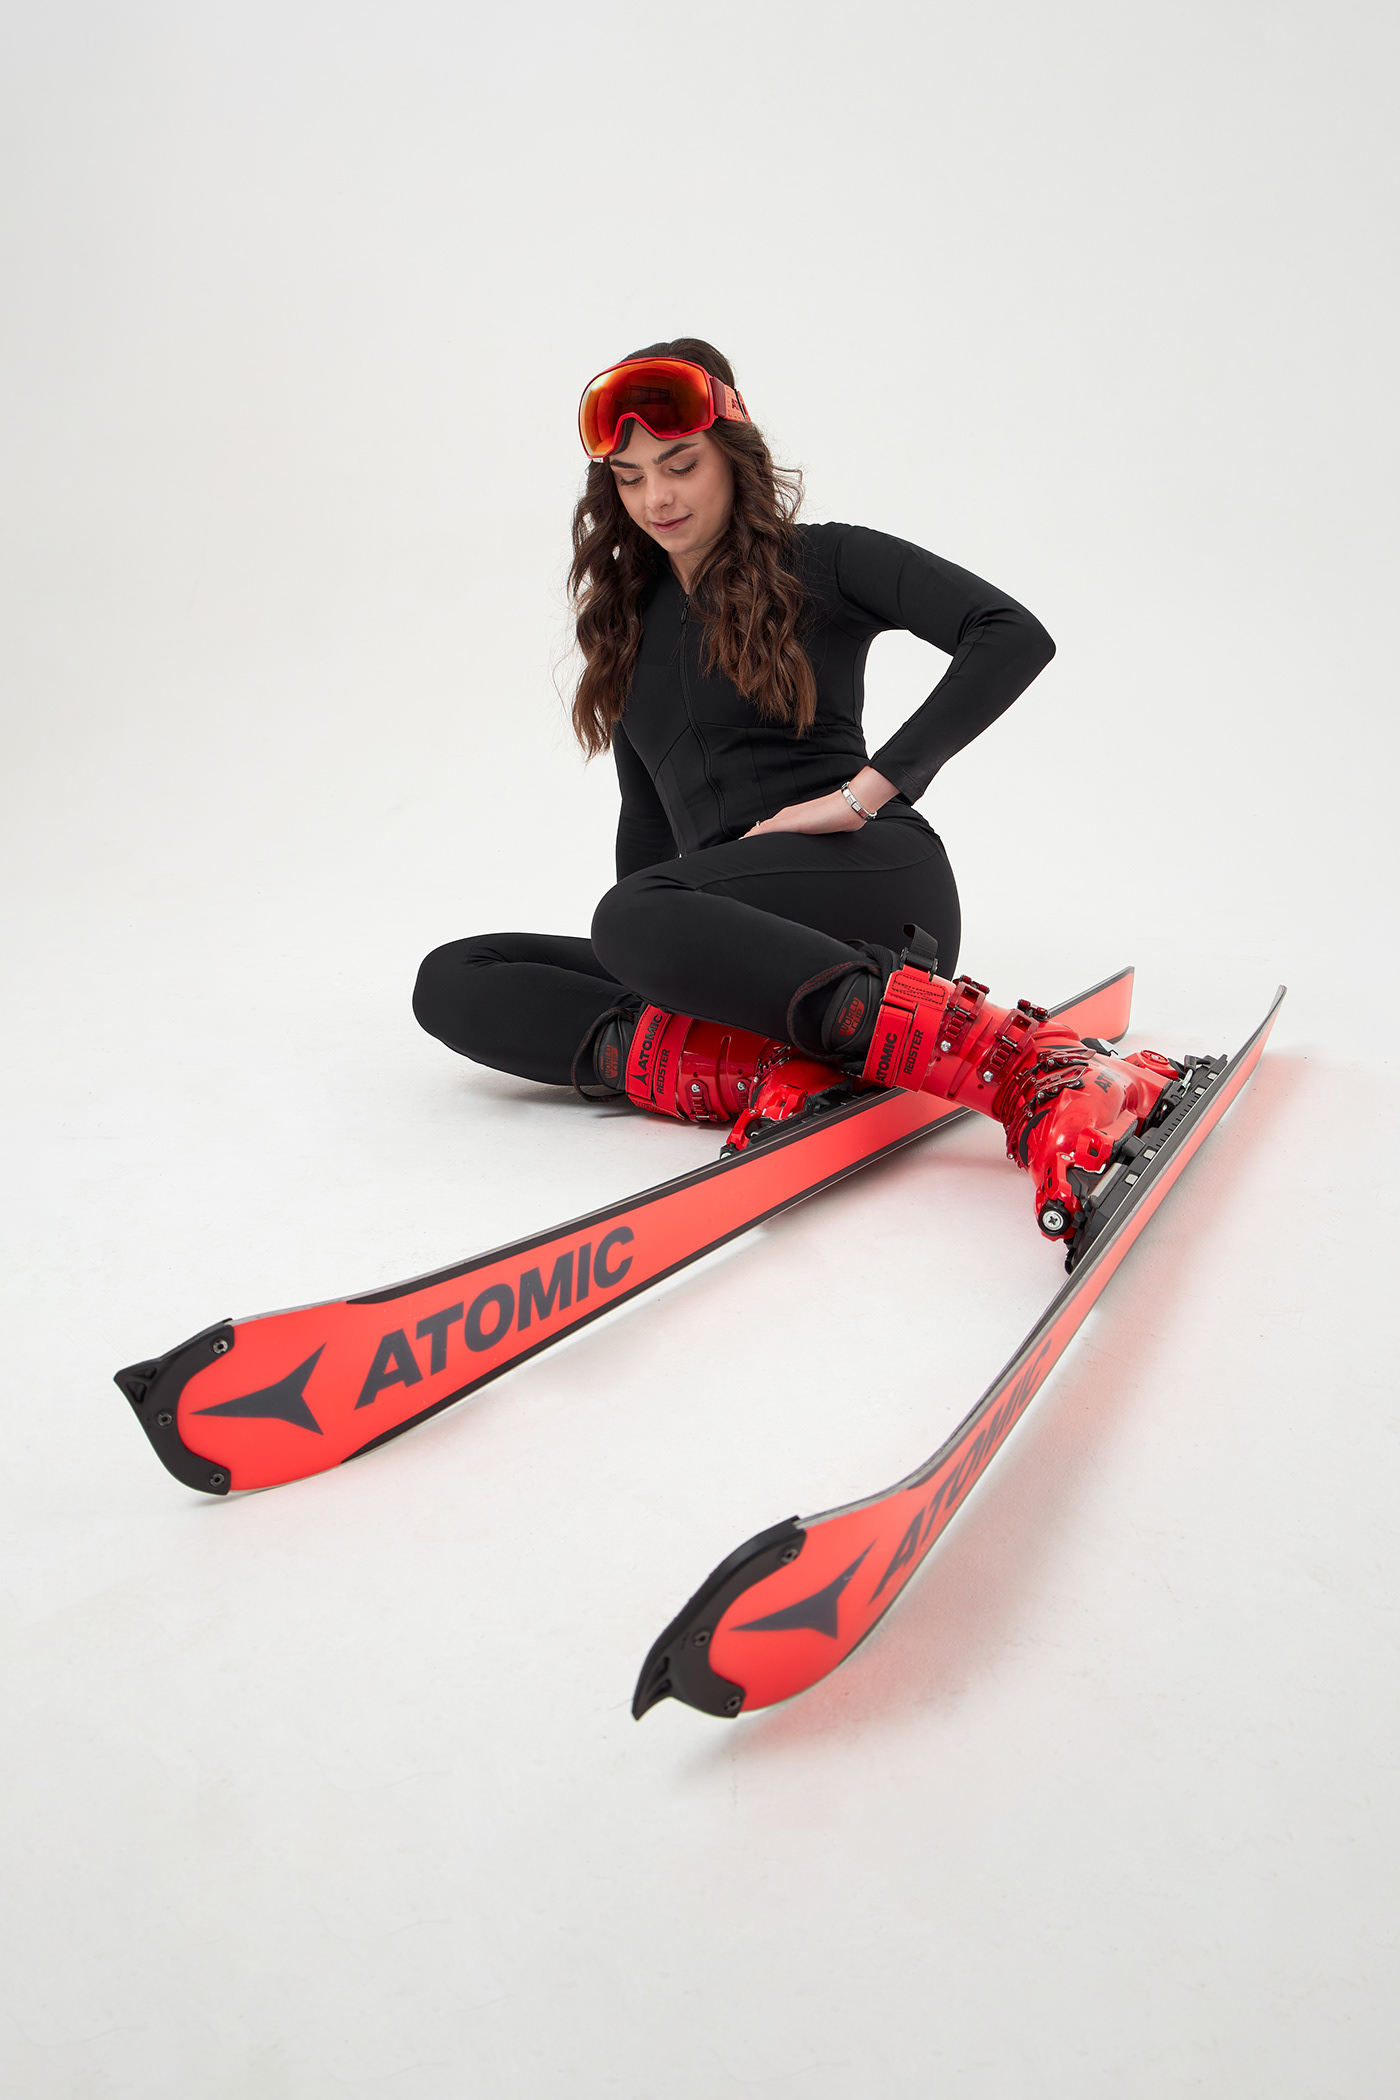 sports photography fashion photography sportsman skier mountain skiing old school red black extreme sports creative photoshoot